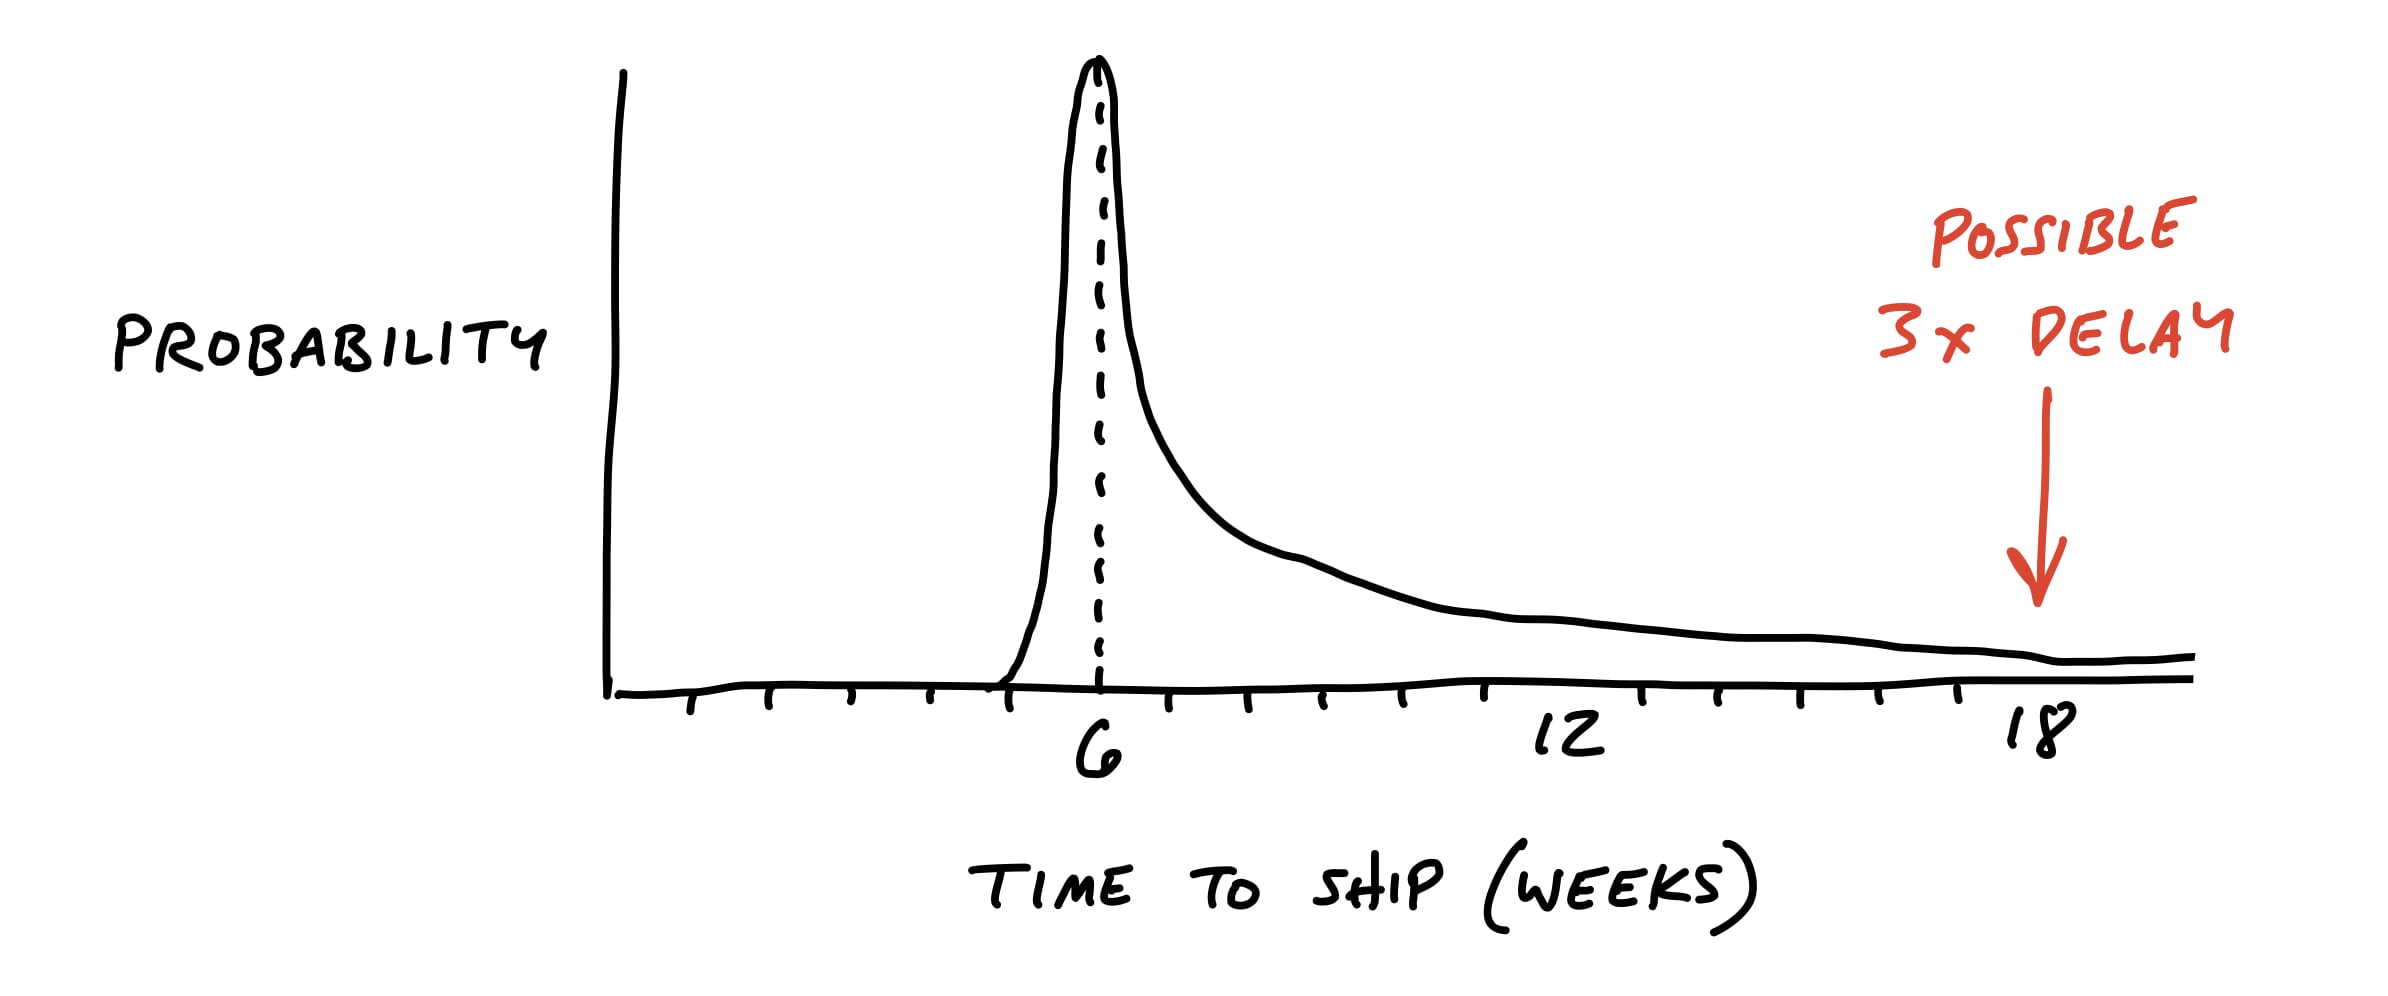 Drawing of a fat tailed probability distributation. The X and Y axes are the same as before. This time the spike up at six weeks has a long slope down which reaches all the way past the 18 week point on the X axis. The area above 18 weeks where the right tail still stretches is labled: Possible 3x delay.